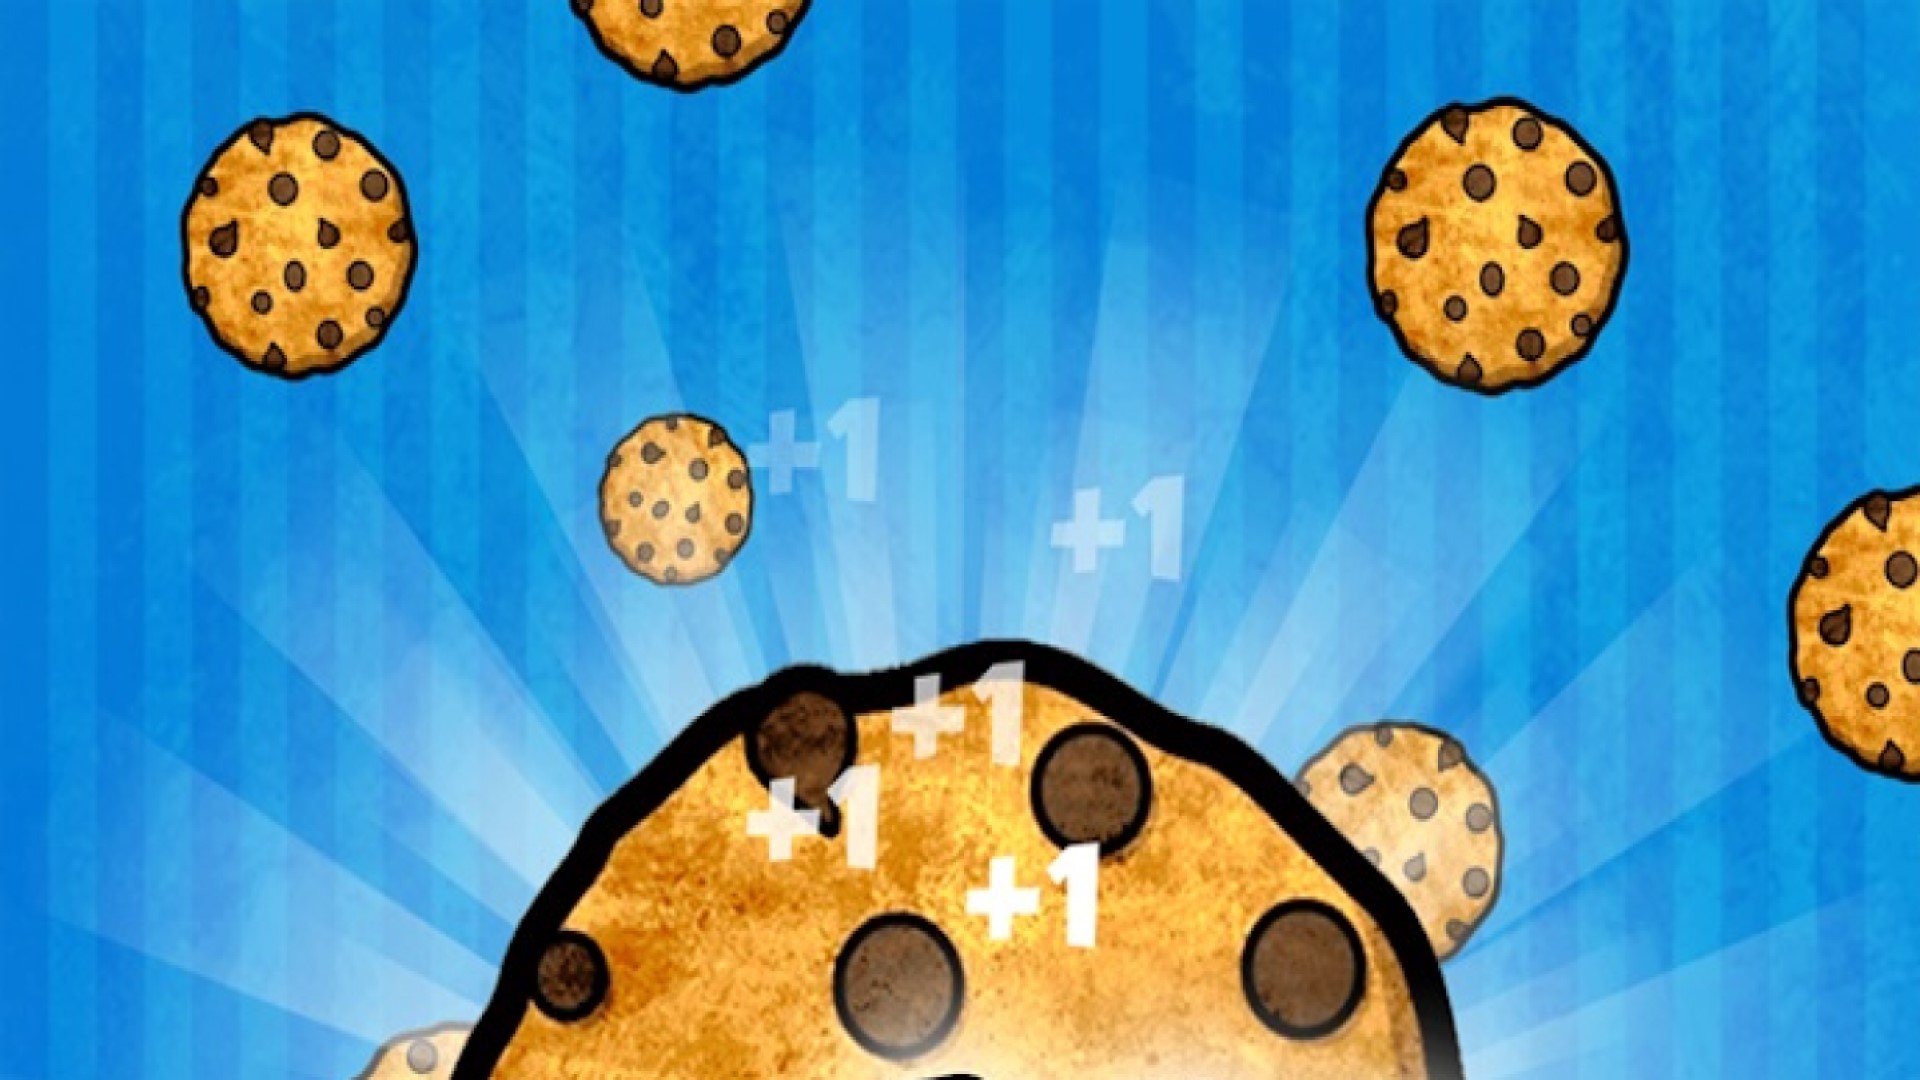 Best idle games: Cookie Clickers. Image shows cookies falling from the sky, with a large cookie in the middle of the screen and various instances of "+1" seen, which indicate the creation of new cookies after a click.